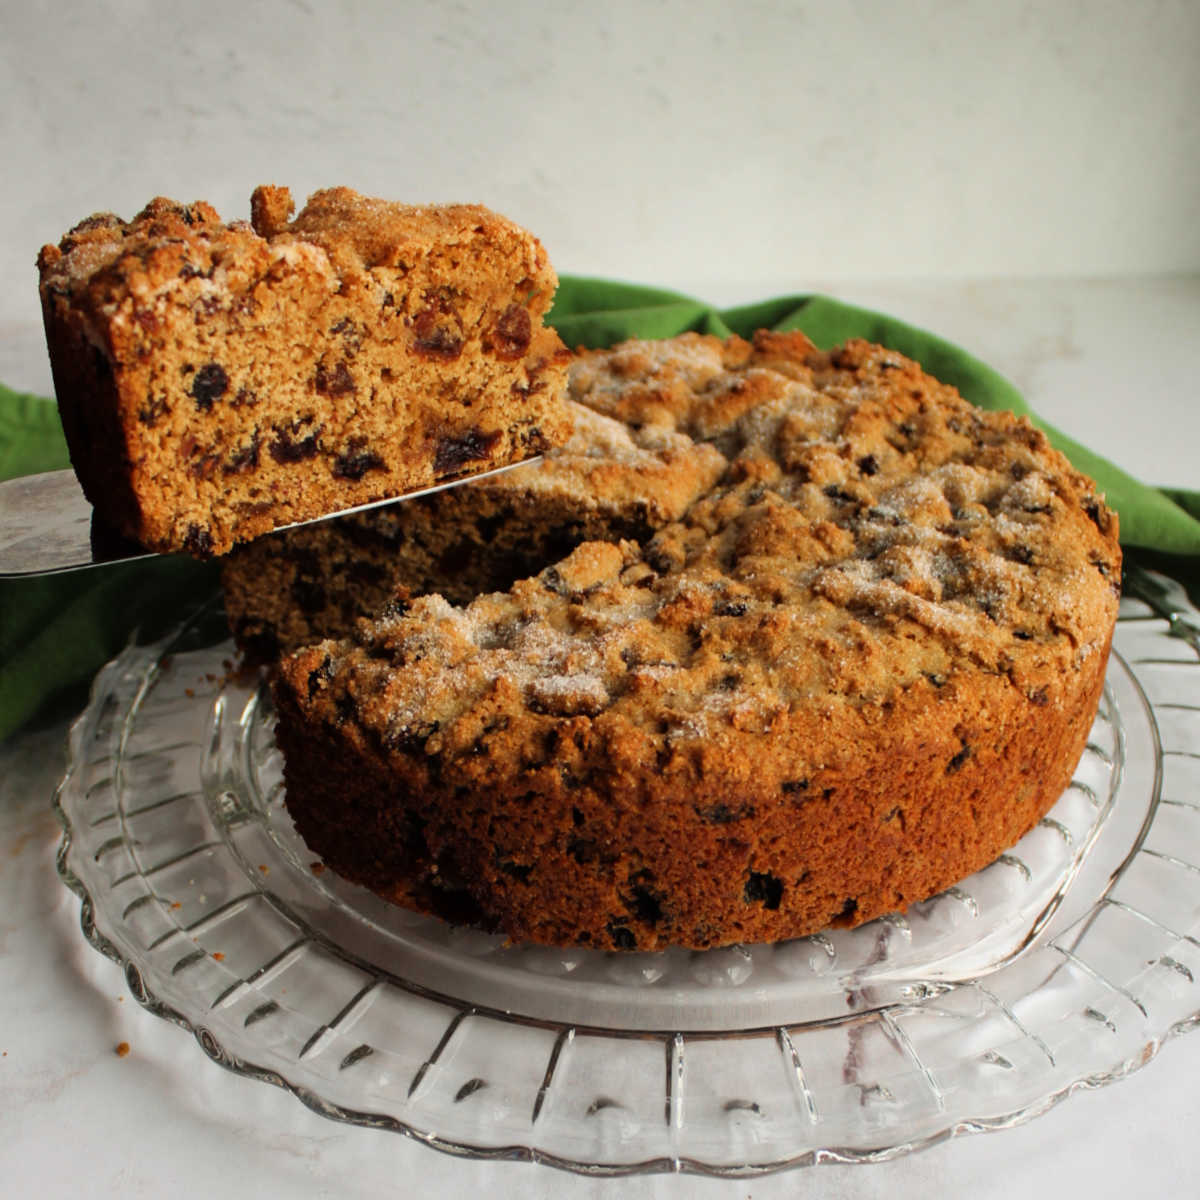 First slice of Irish tea brack being lifted out of round cakelike loaf, showing lots of fruit in the interior.